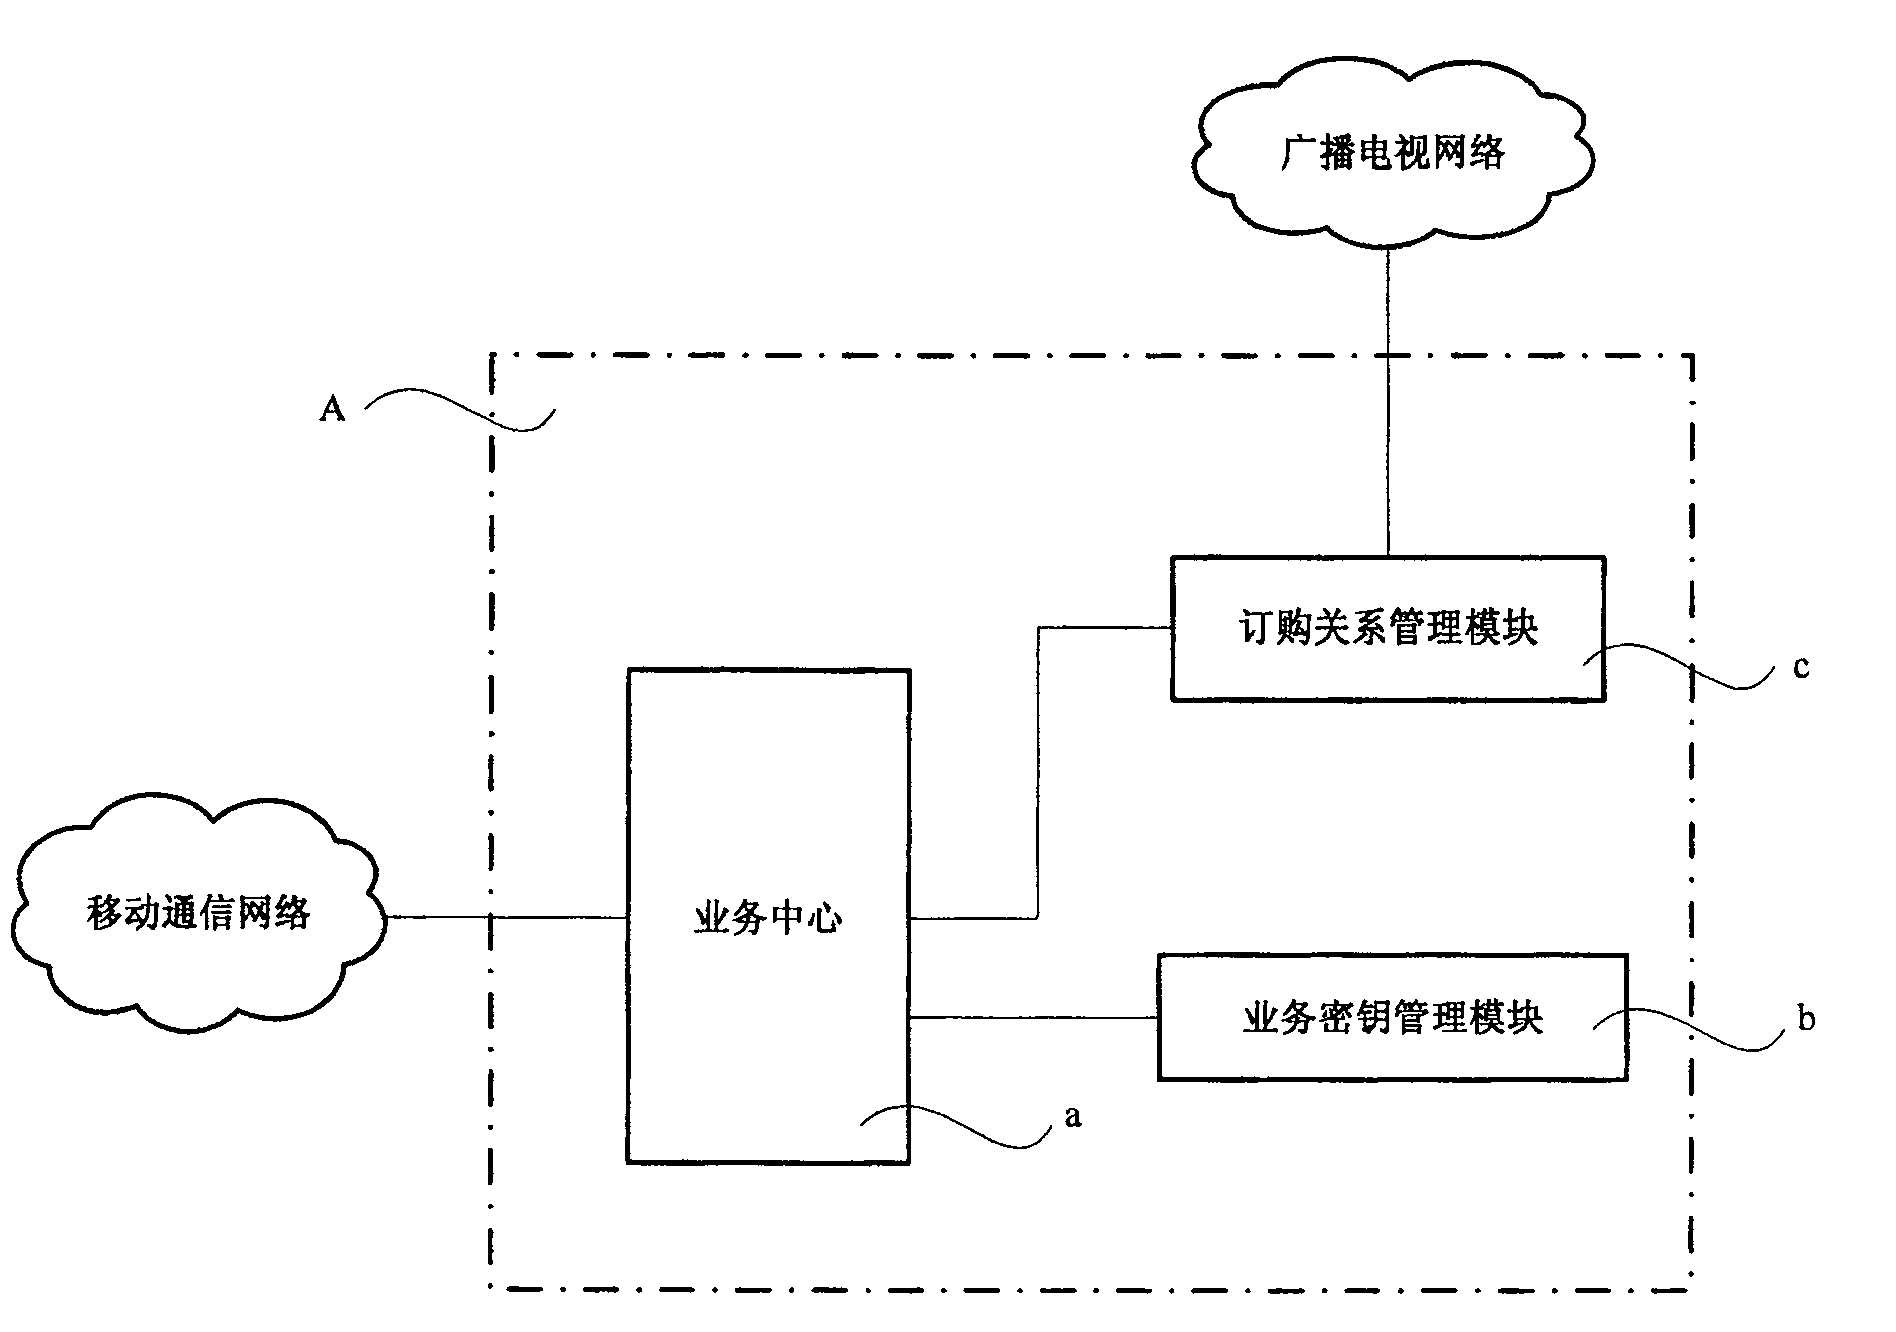 Mobile television broadcasting control system and broadcasting network and method